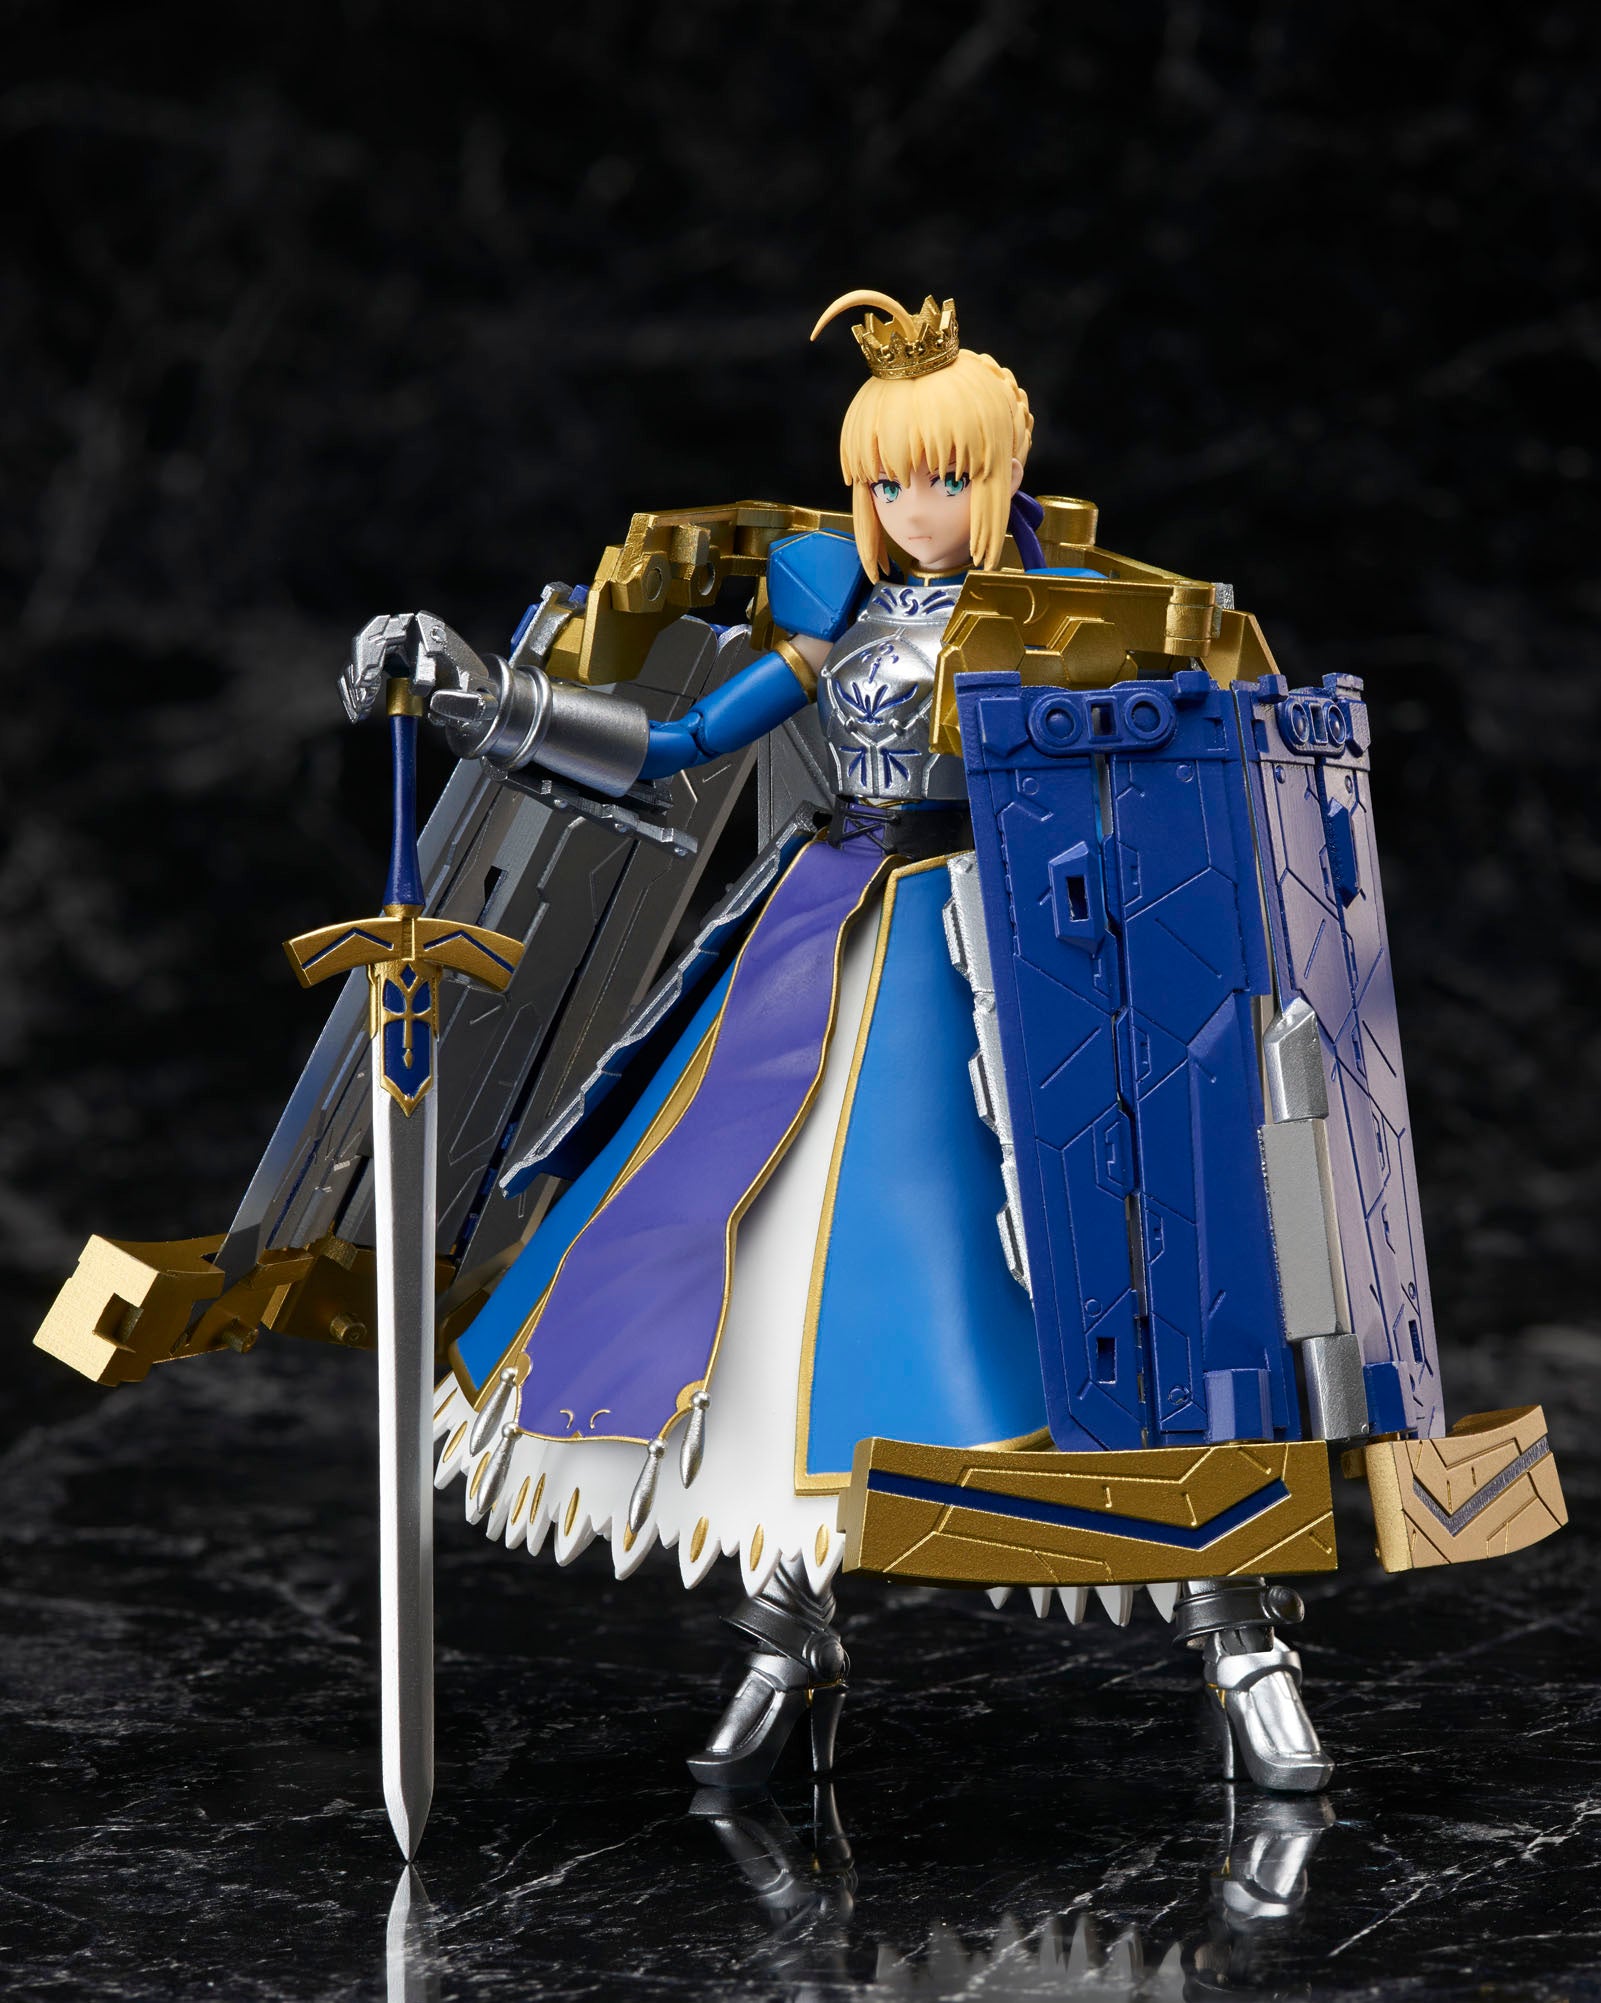 Bandai Armor Girls Project AGP Saber Altria Pendragon and Variable Excalibur Fate/Grand Order Action Figure